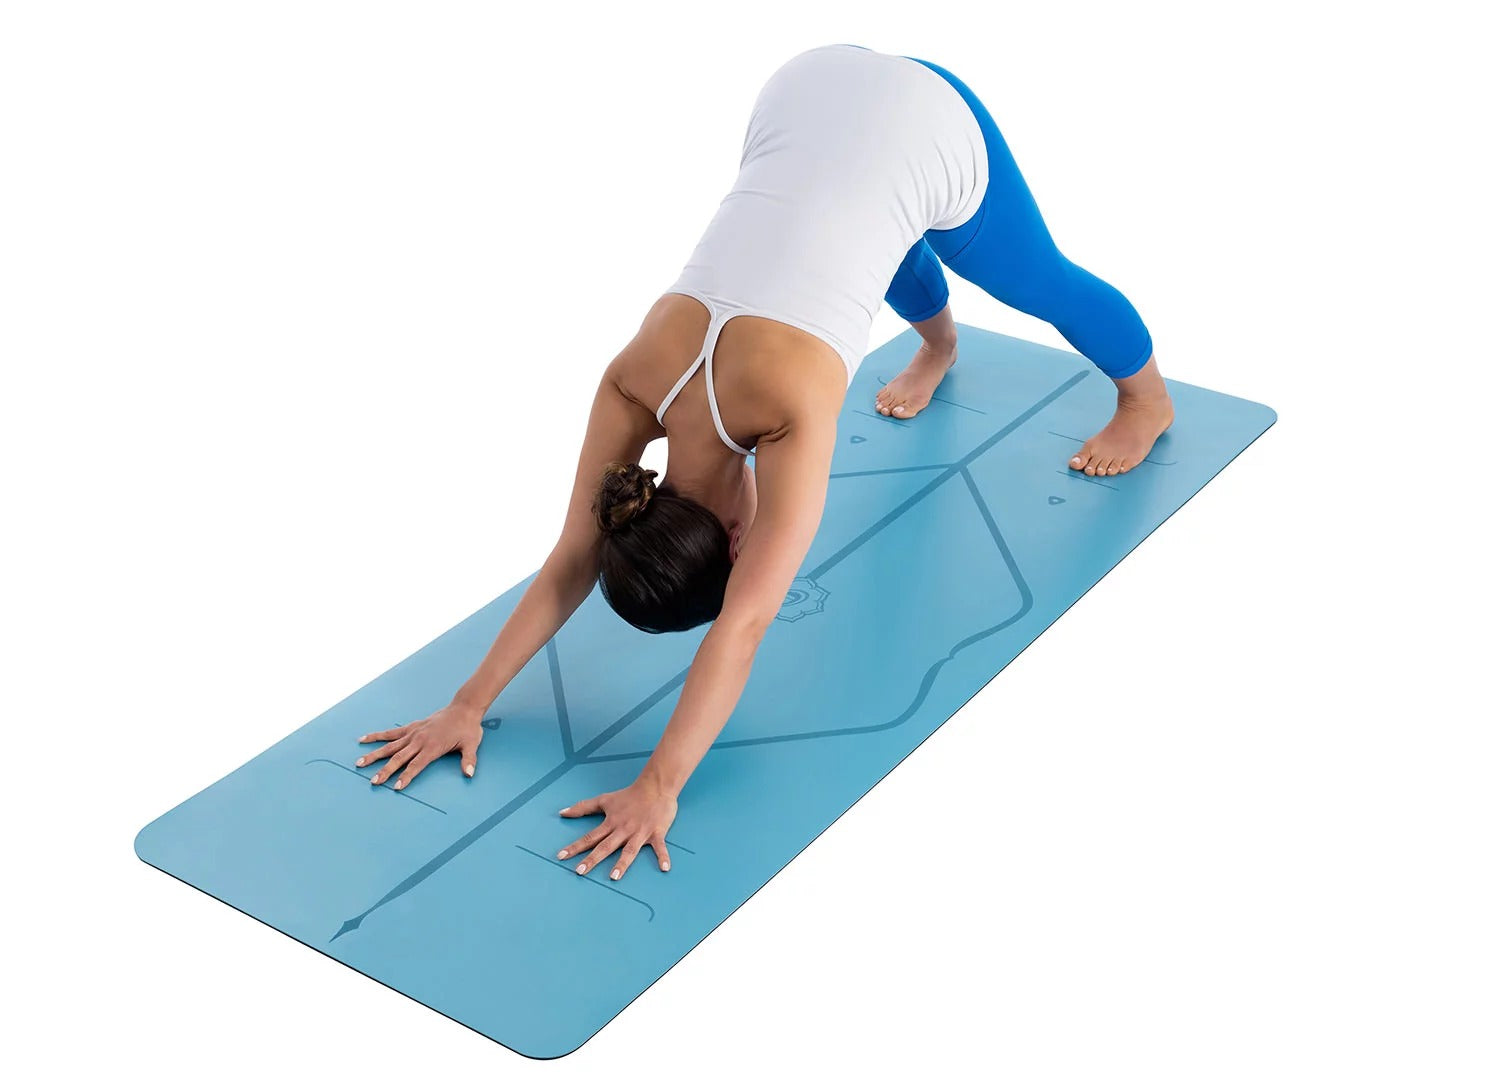  Liforme Travel Yoga mat – Patented Alignment System,  Warrior-Like Grip, Non-Slip, Eco-Friendly, Ultra-Lightweight and Sweat  Resistant, Made with Natural Rubber (Blue Sky) : Sports & Outdoors